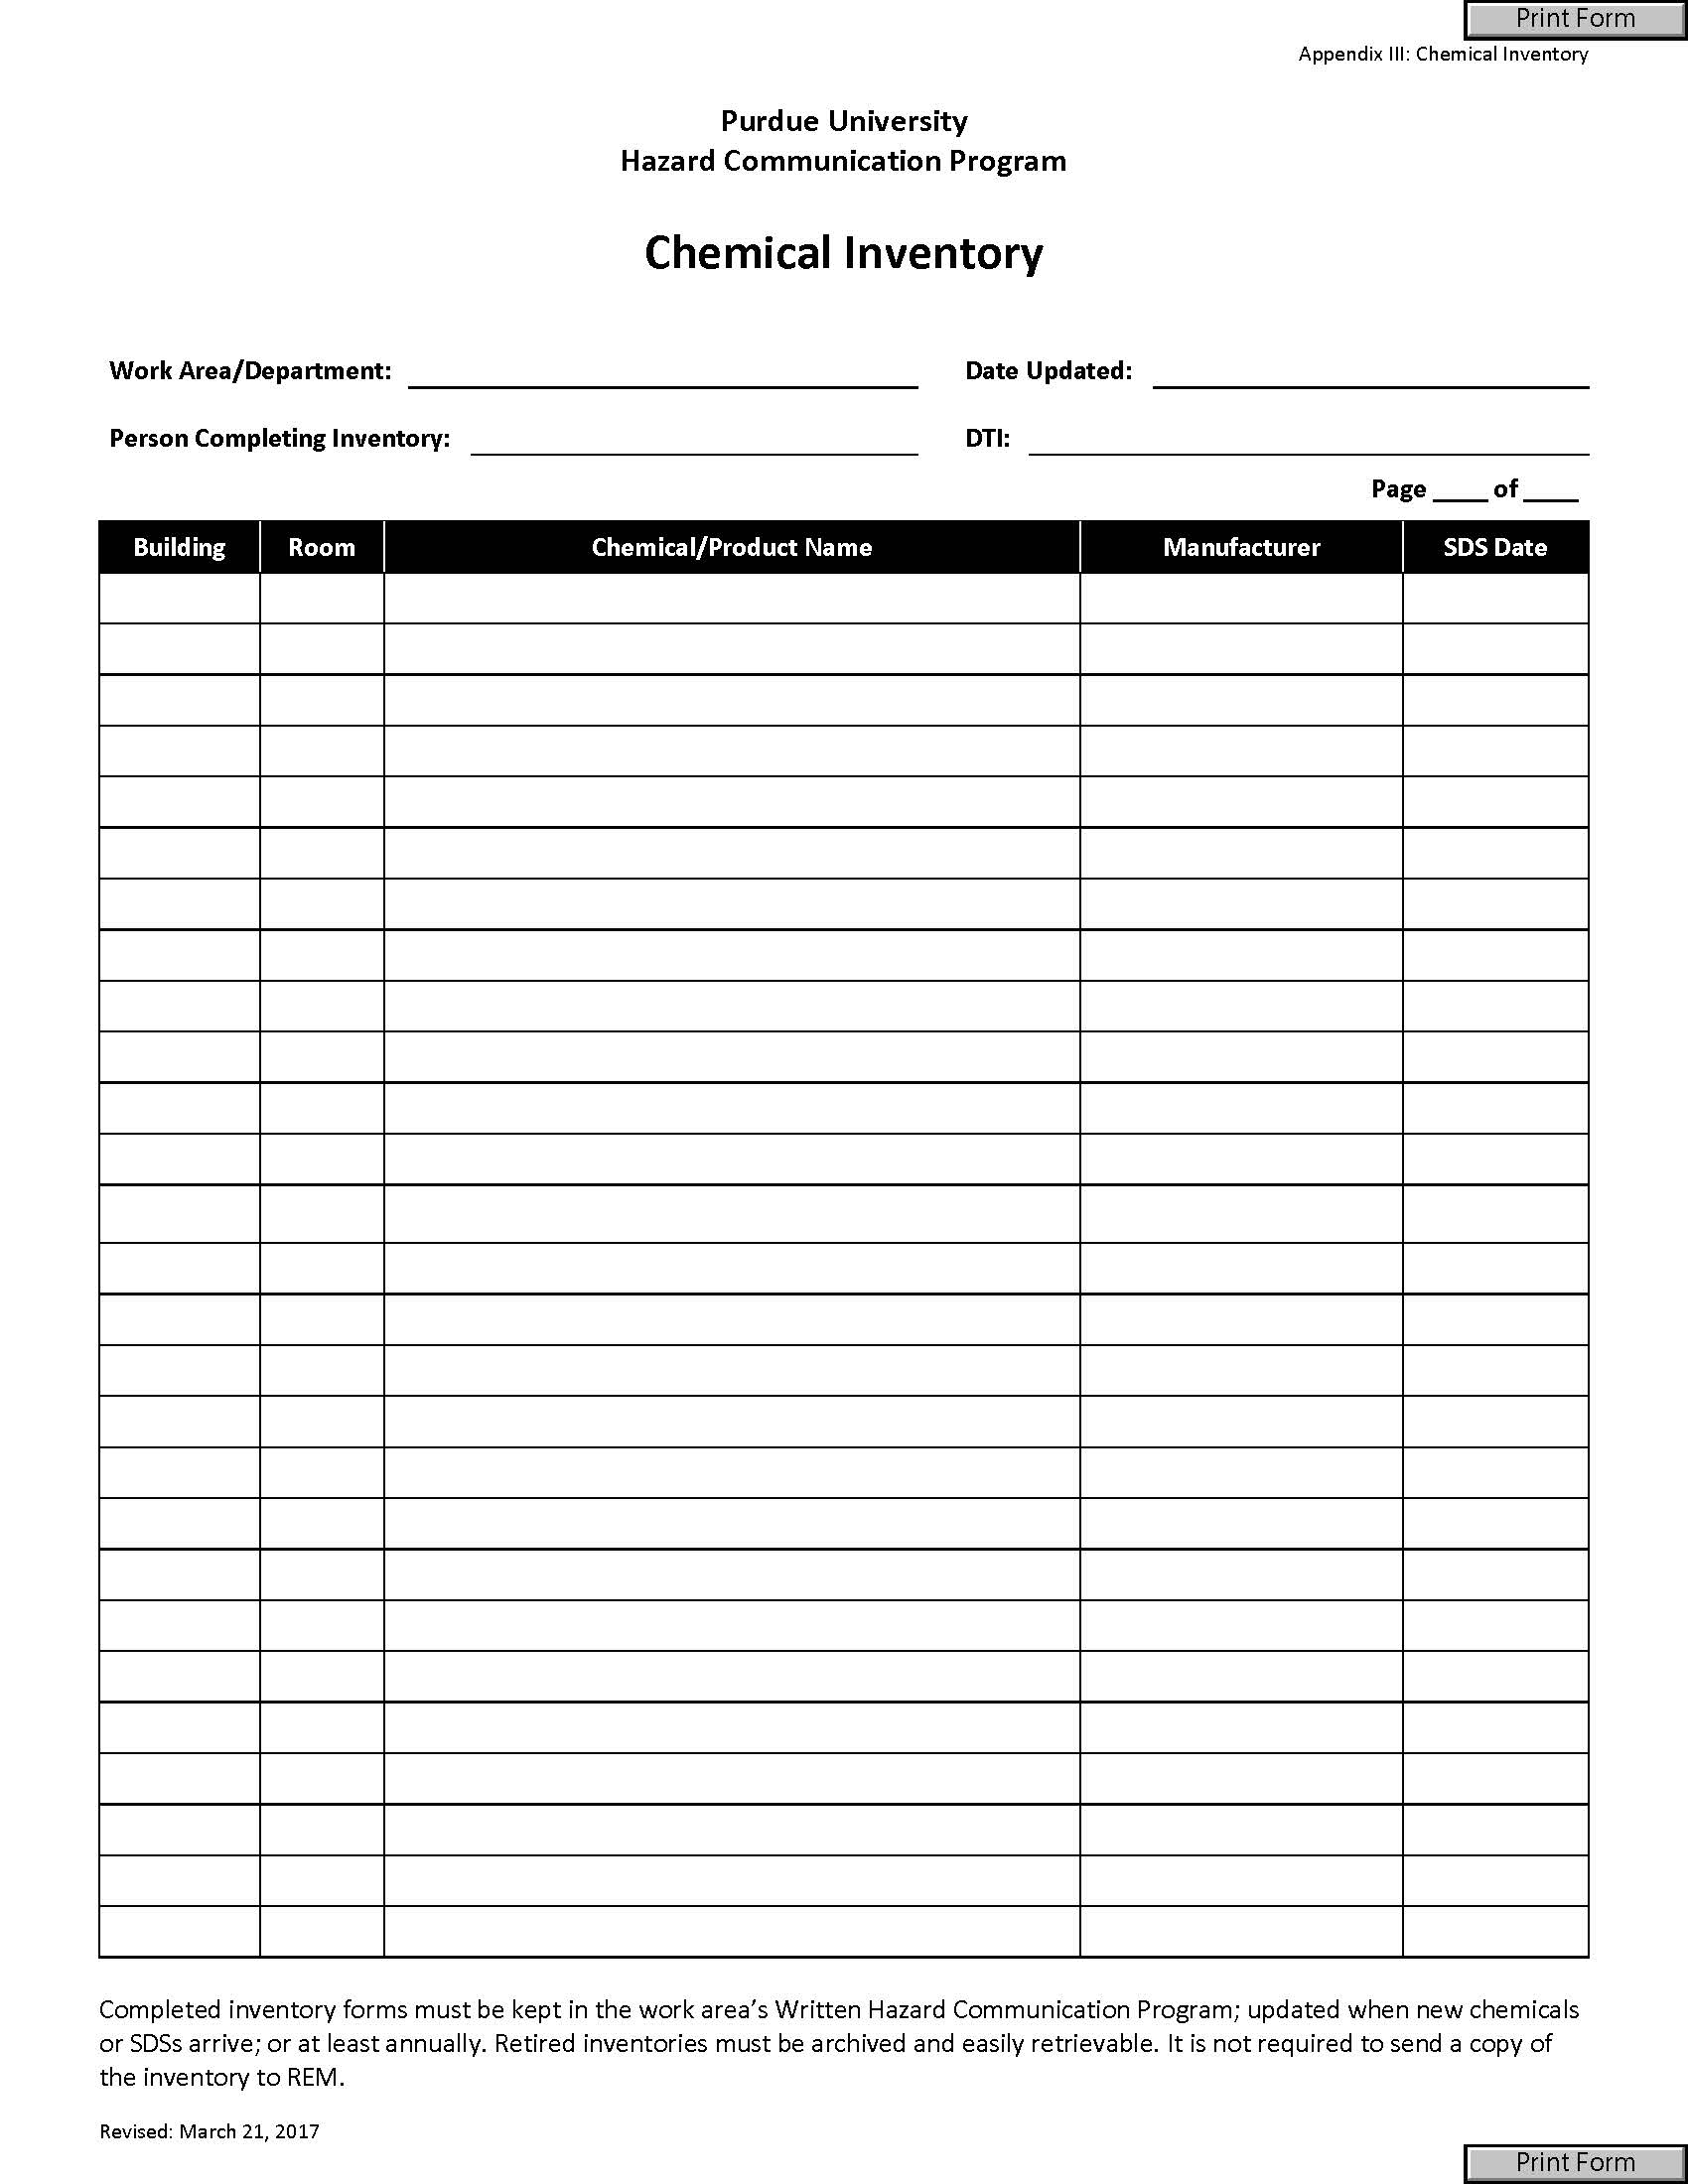 image of chemical inventory form